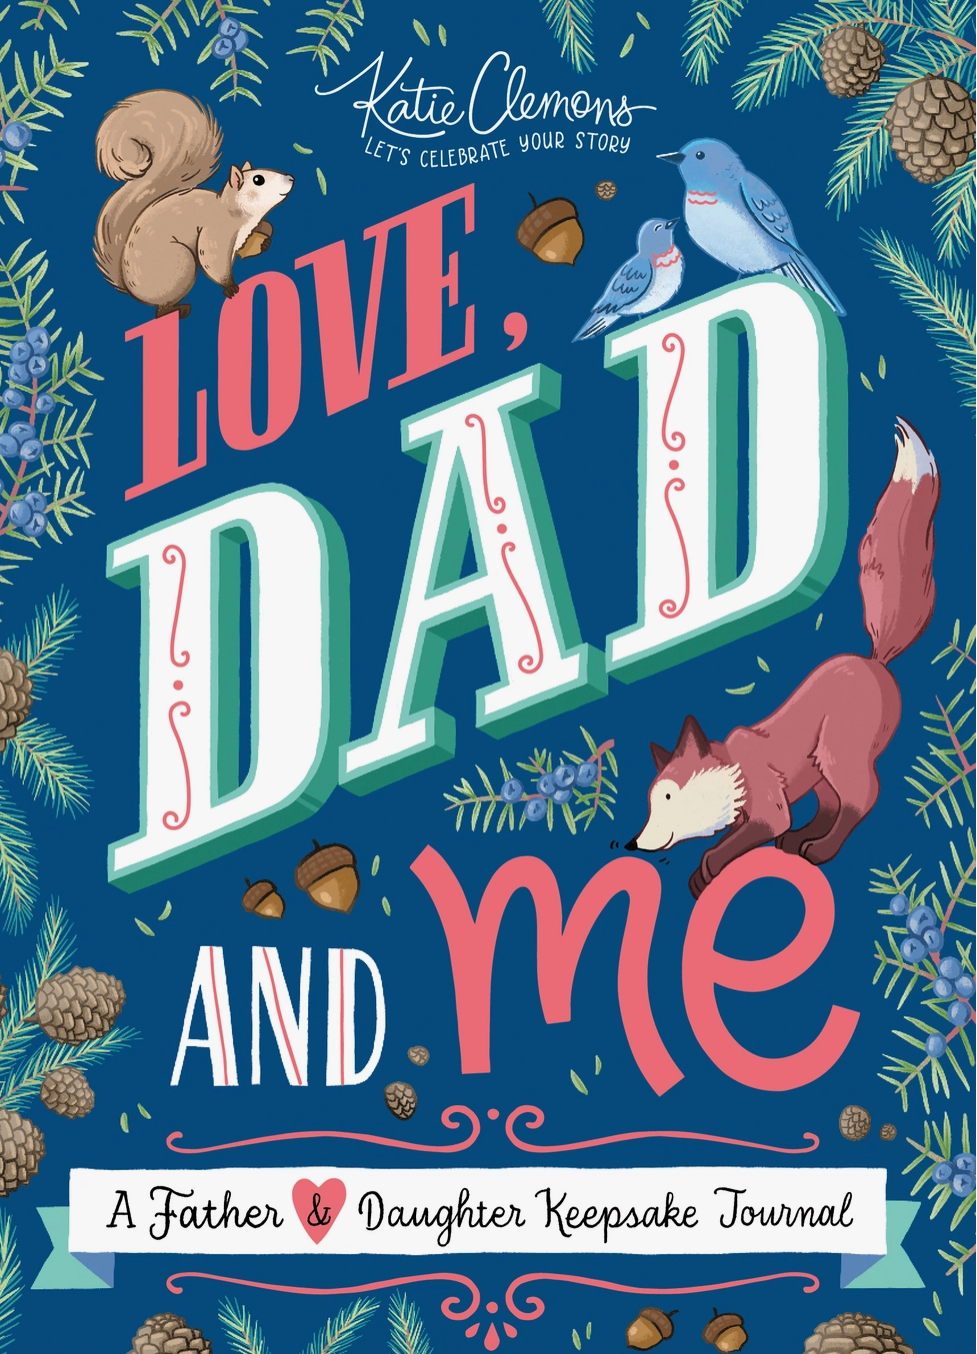 Love, Dad and Me: A Father & Daughter Keepsake Journal!